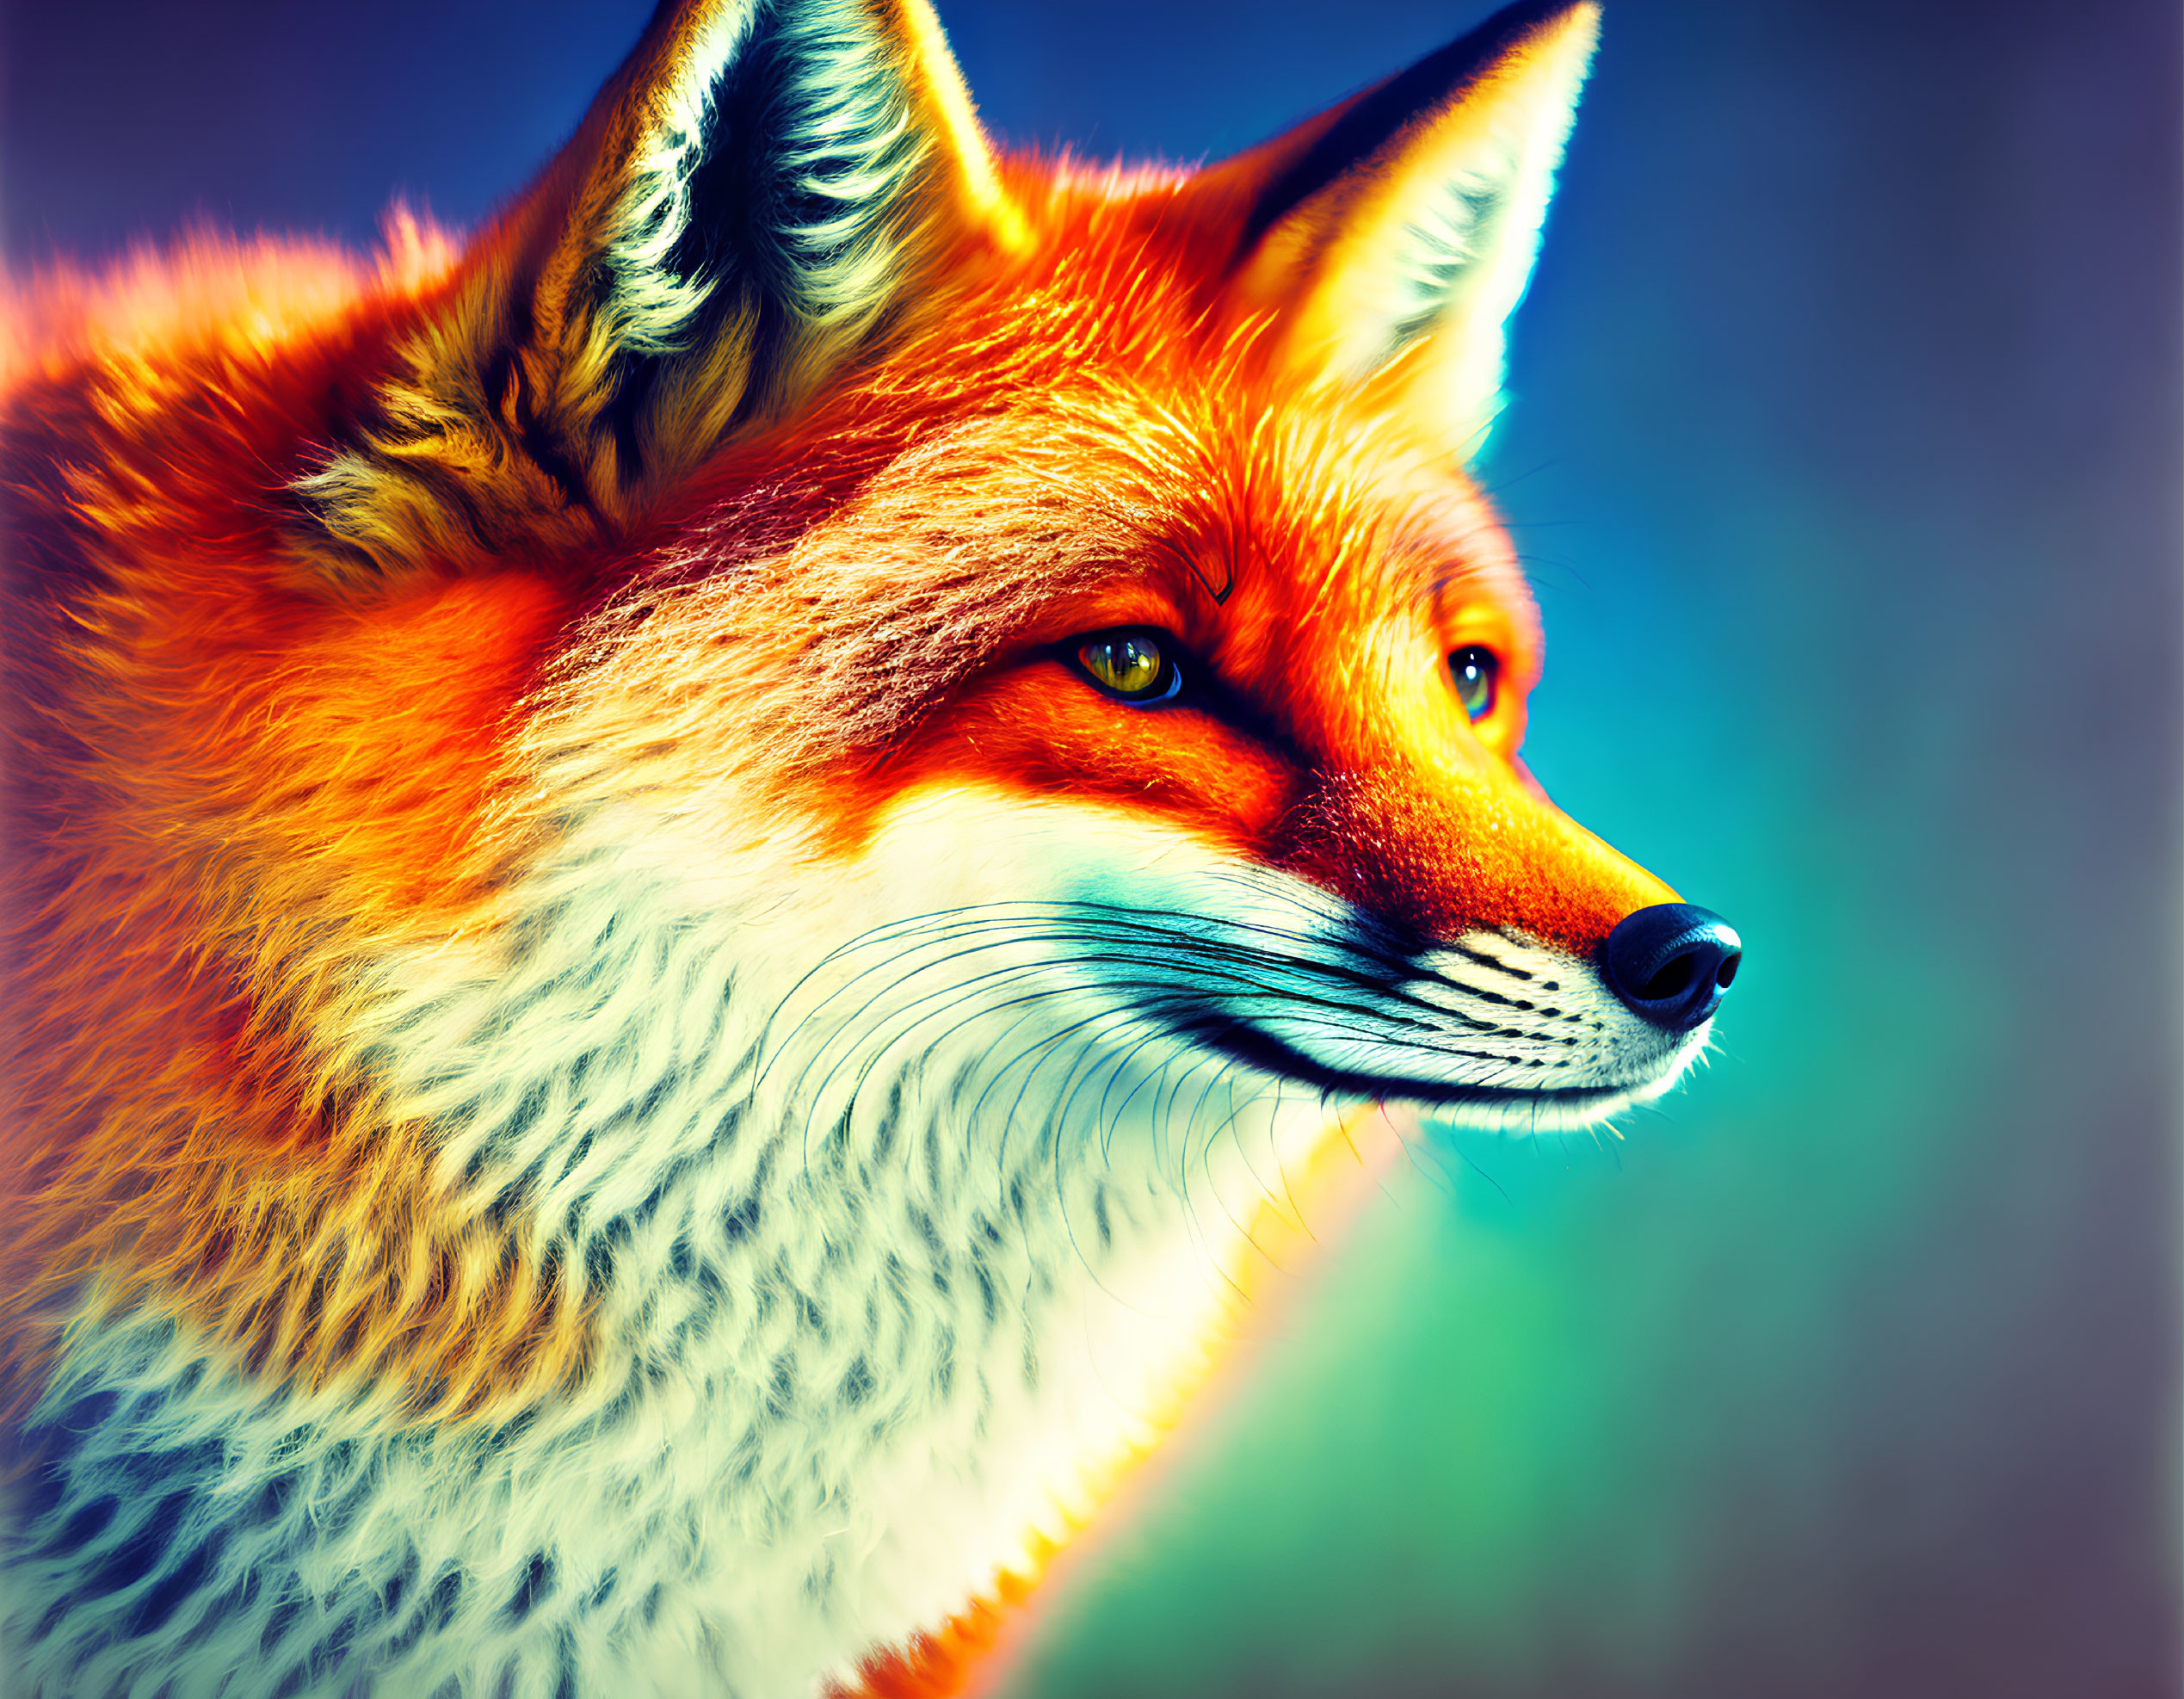 Vibrant red fox with intense orange fur on gradient blue background